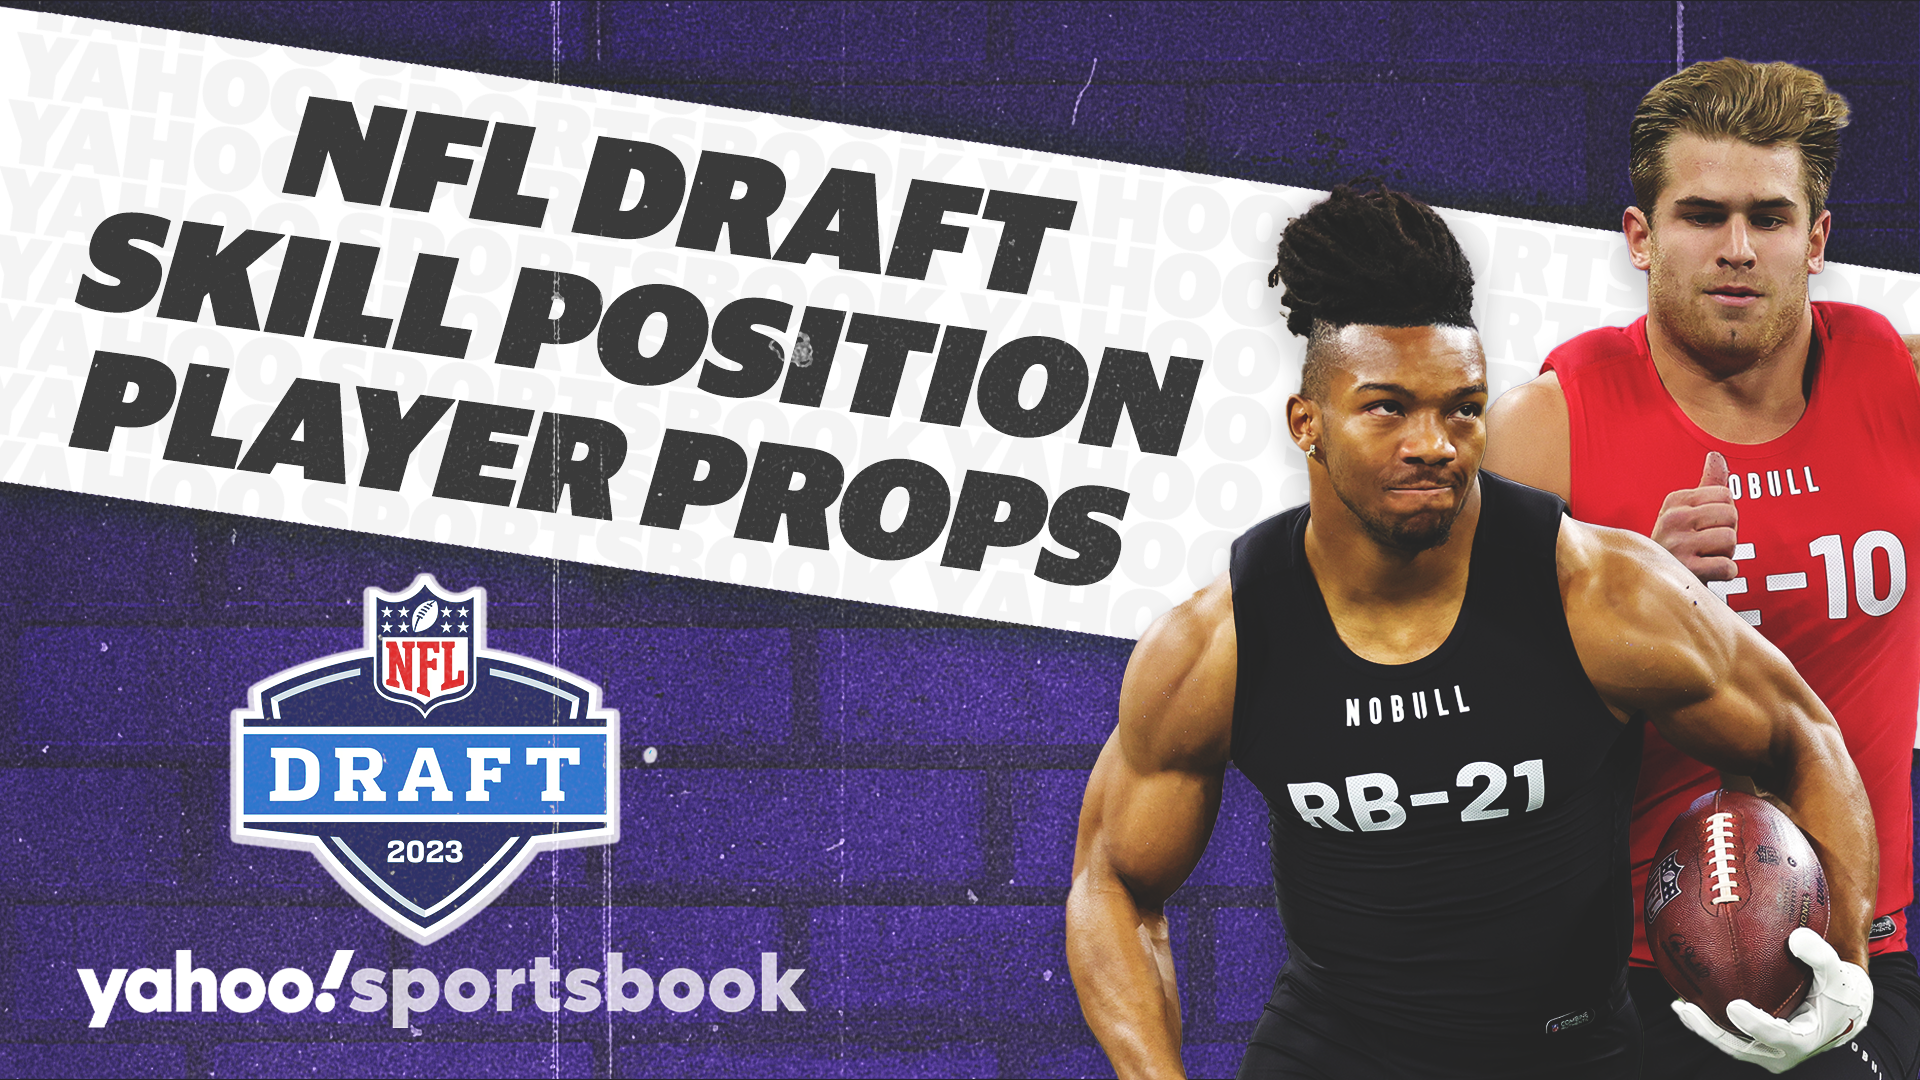 2023 NFL Draft Betting Markets And Prop Bets